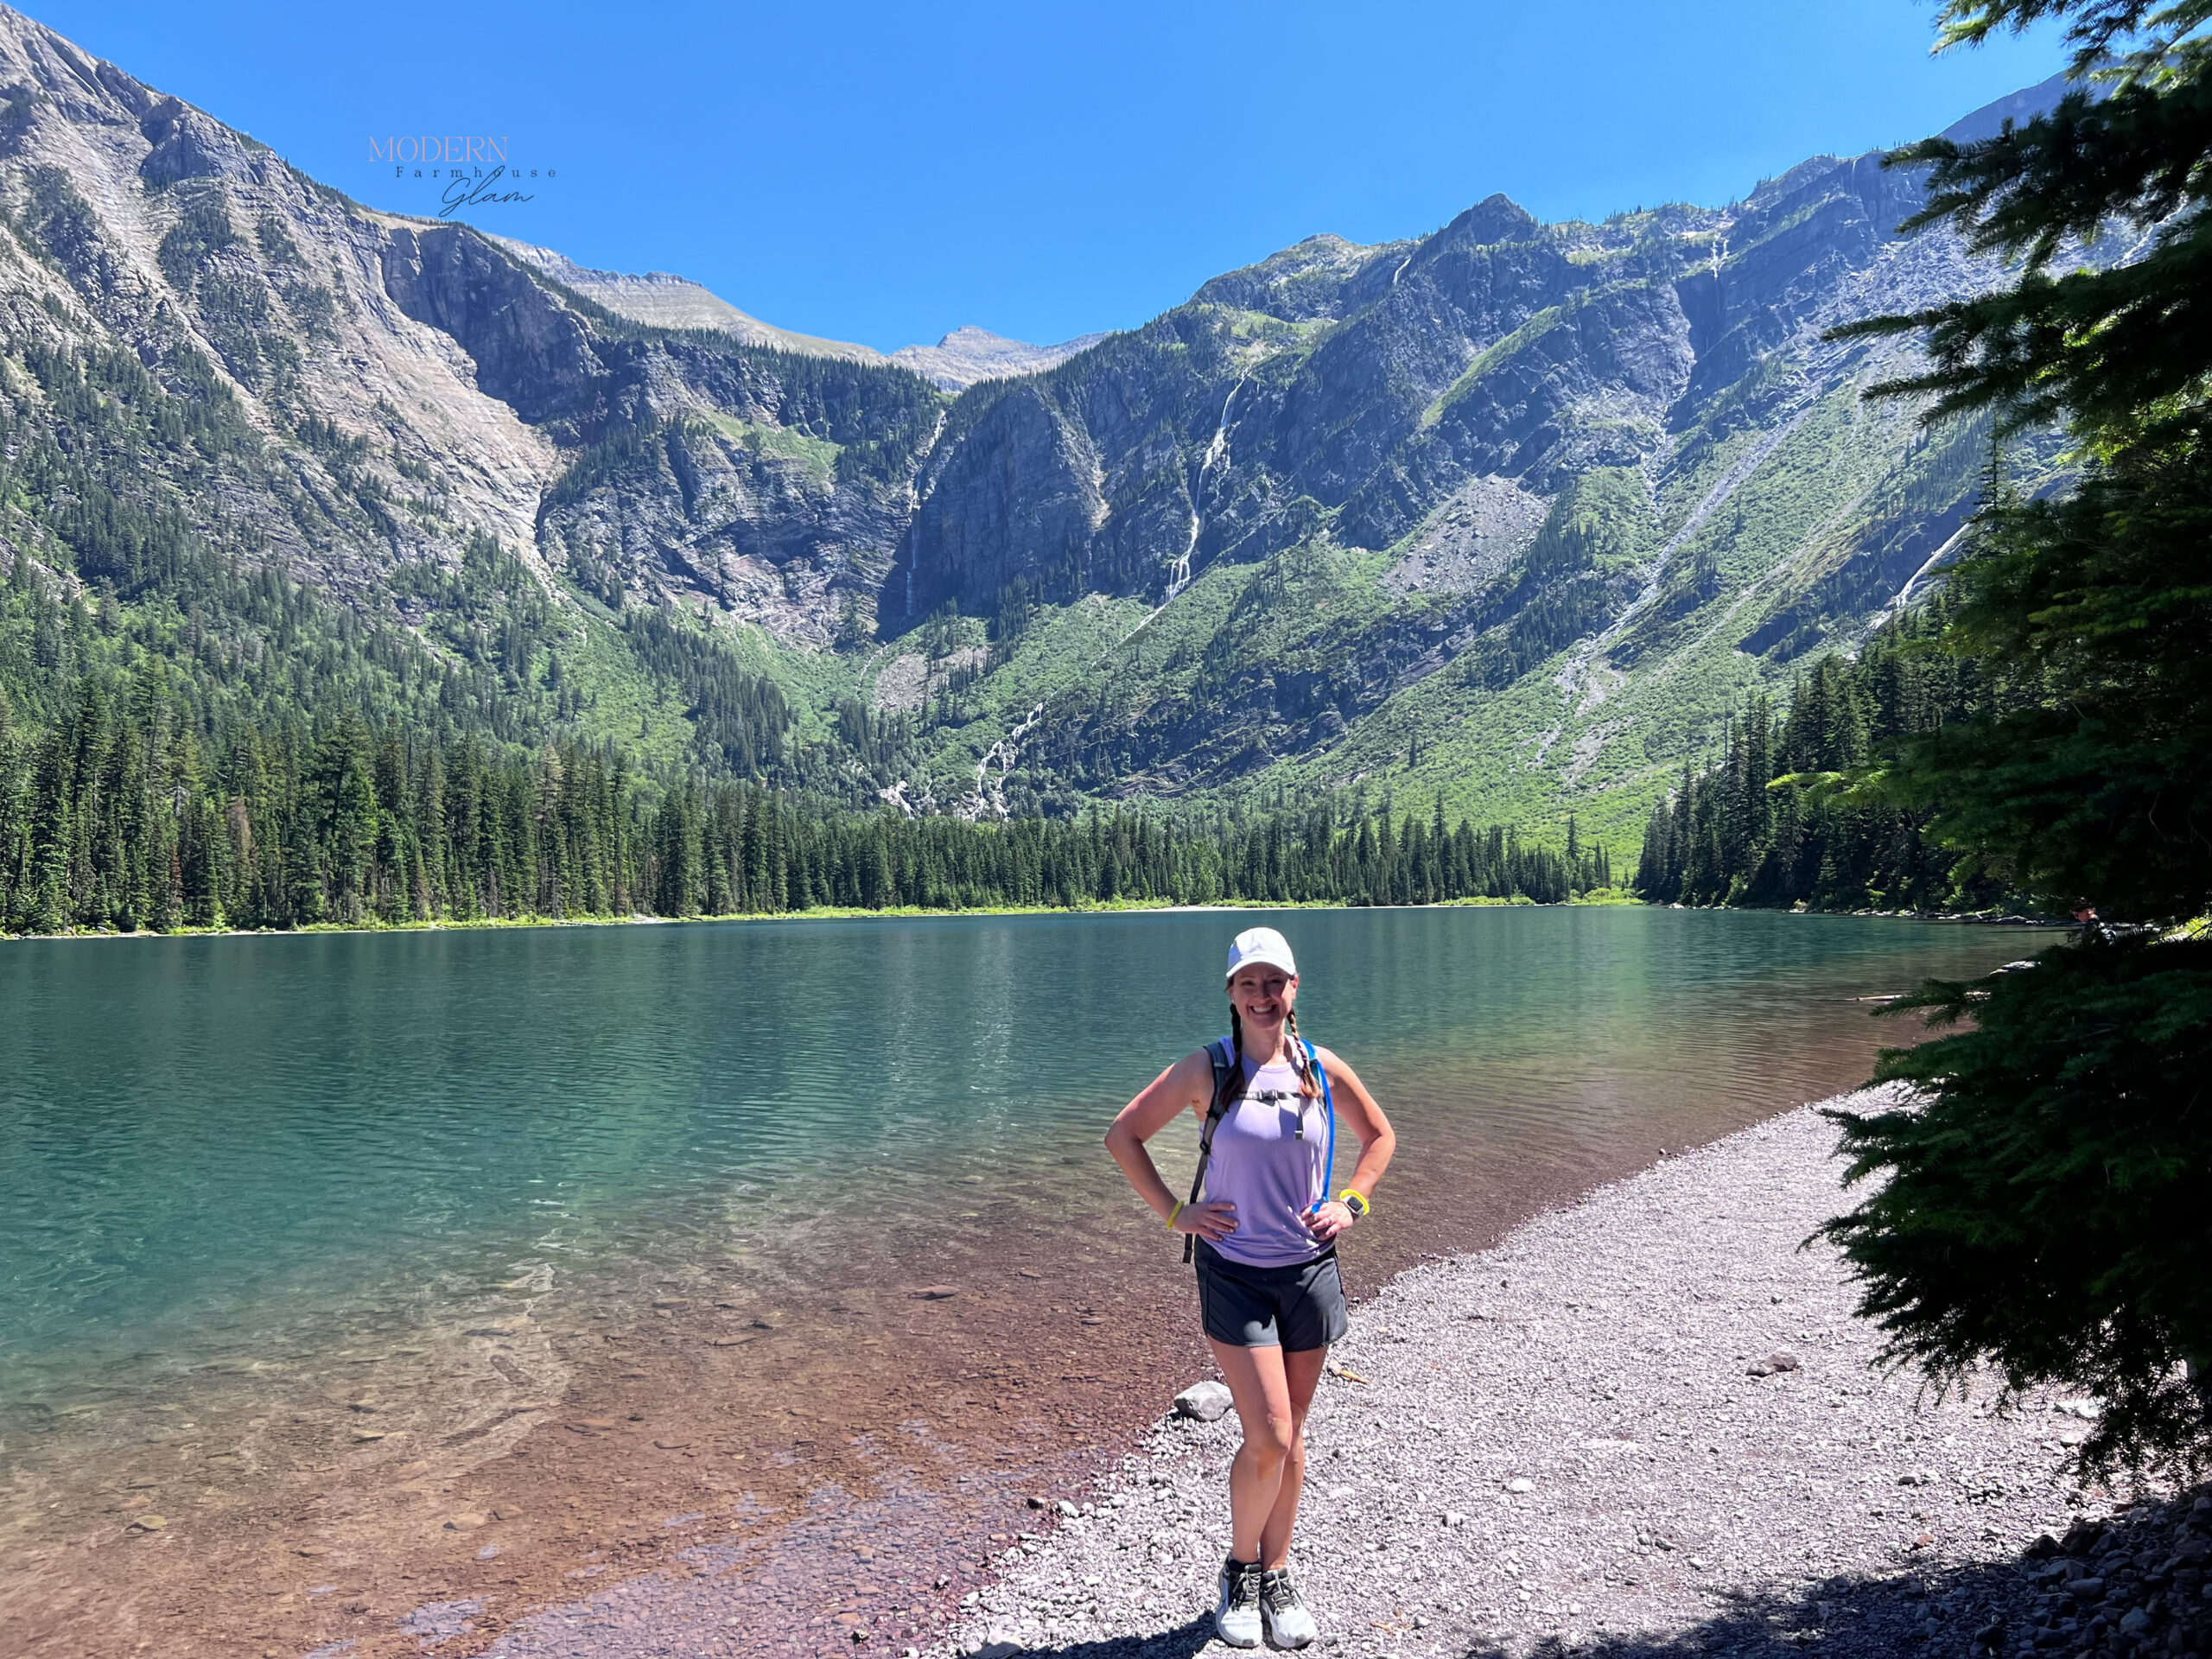 Me in front of the crystal clear waters of Avalanche Lake, Glacier National Park